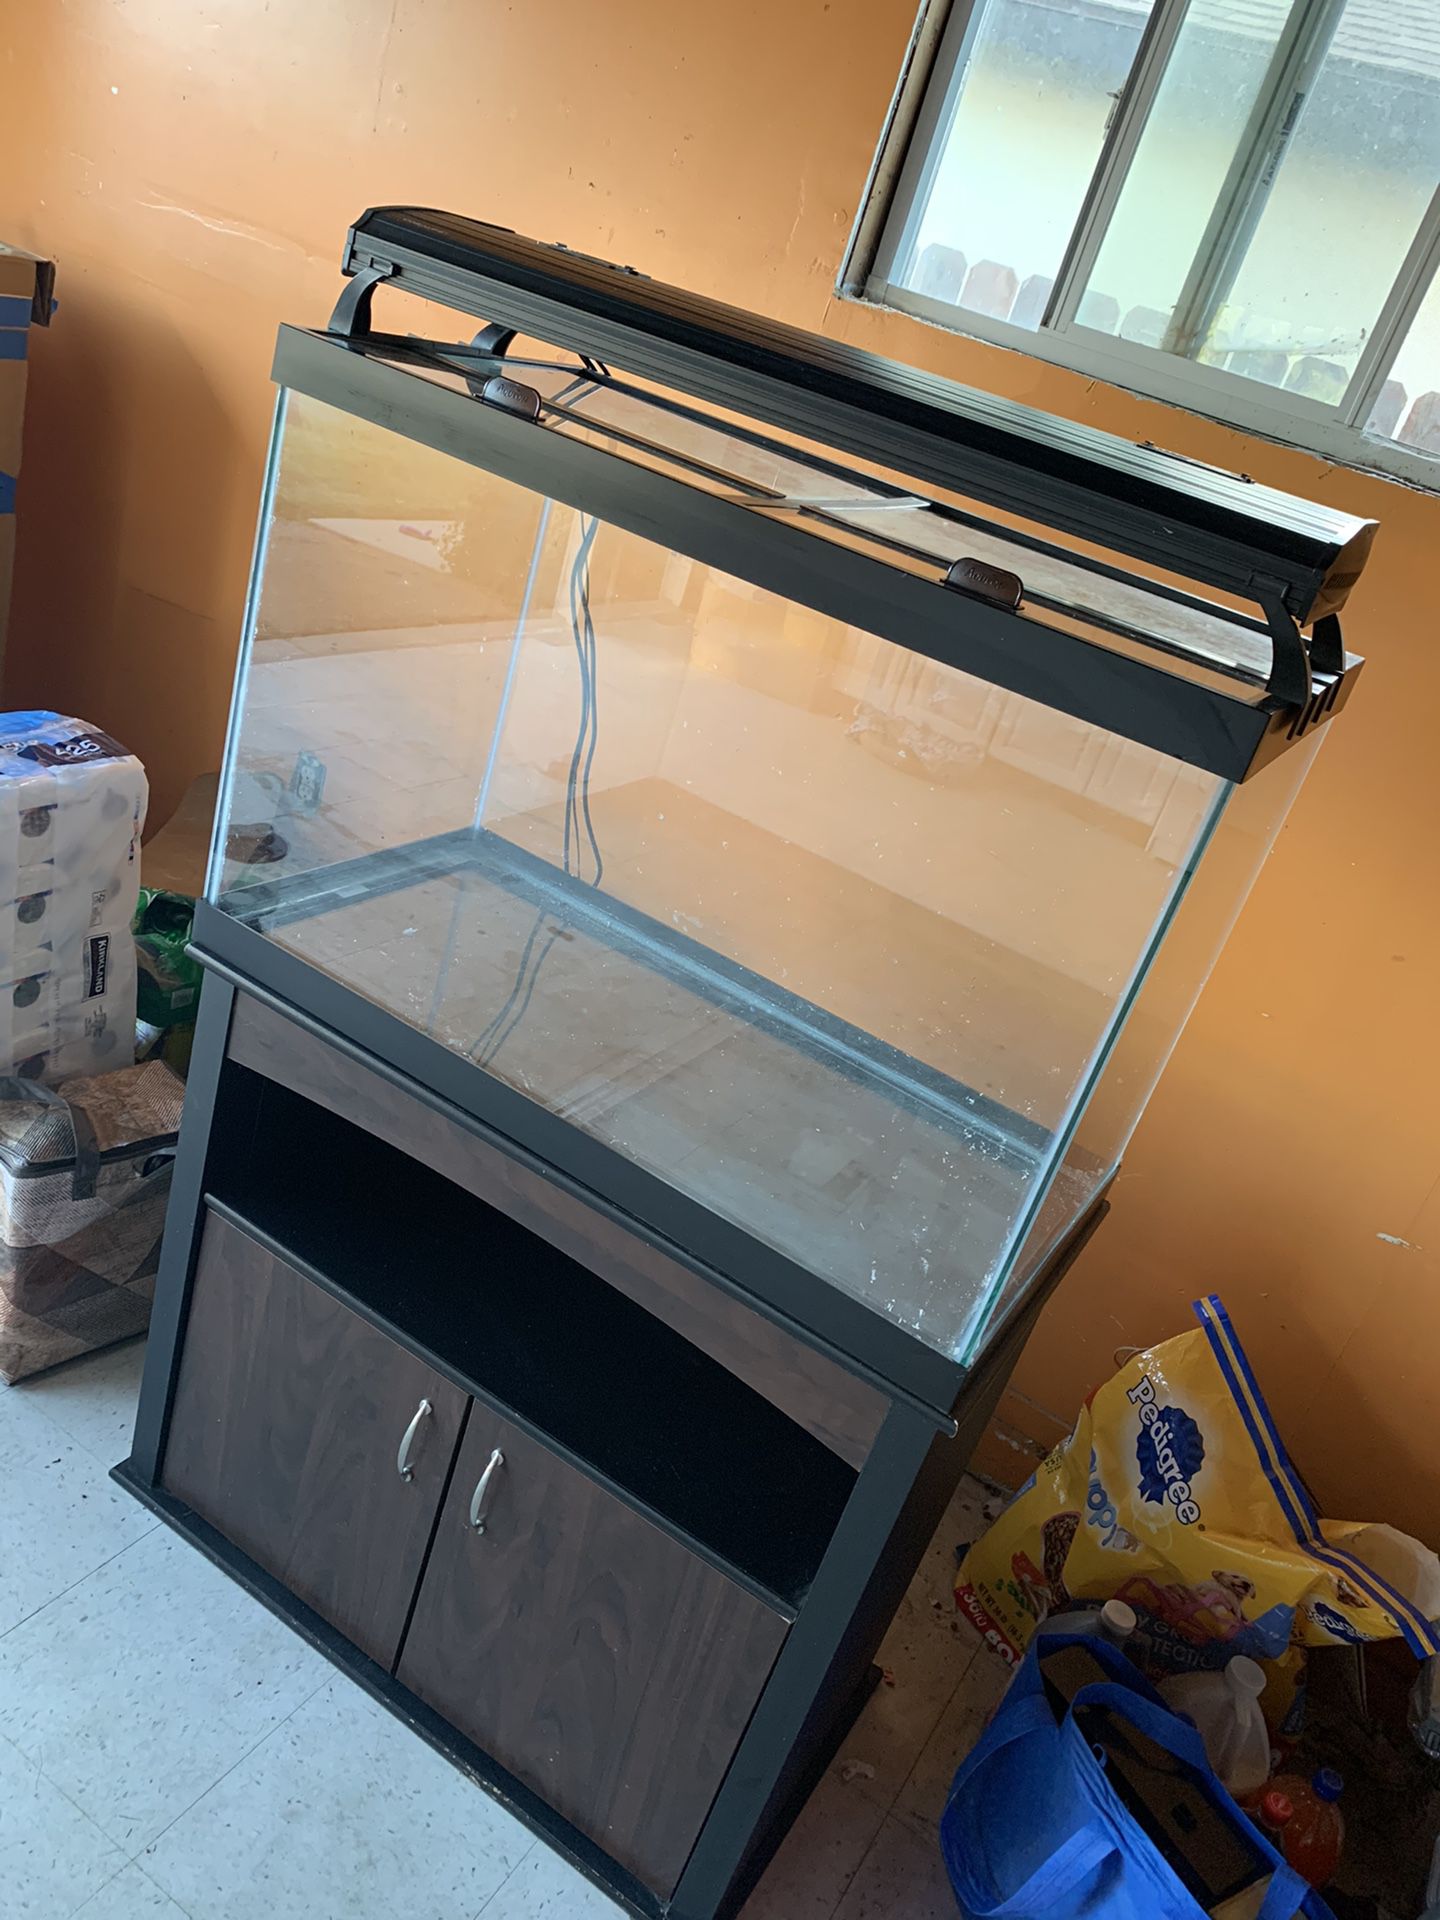 75 gallon fish tank with stand and light fixture